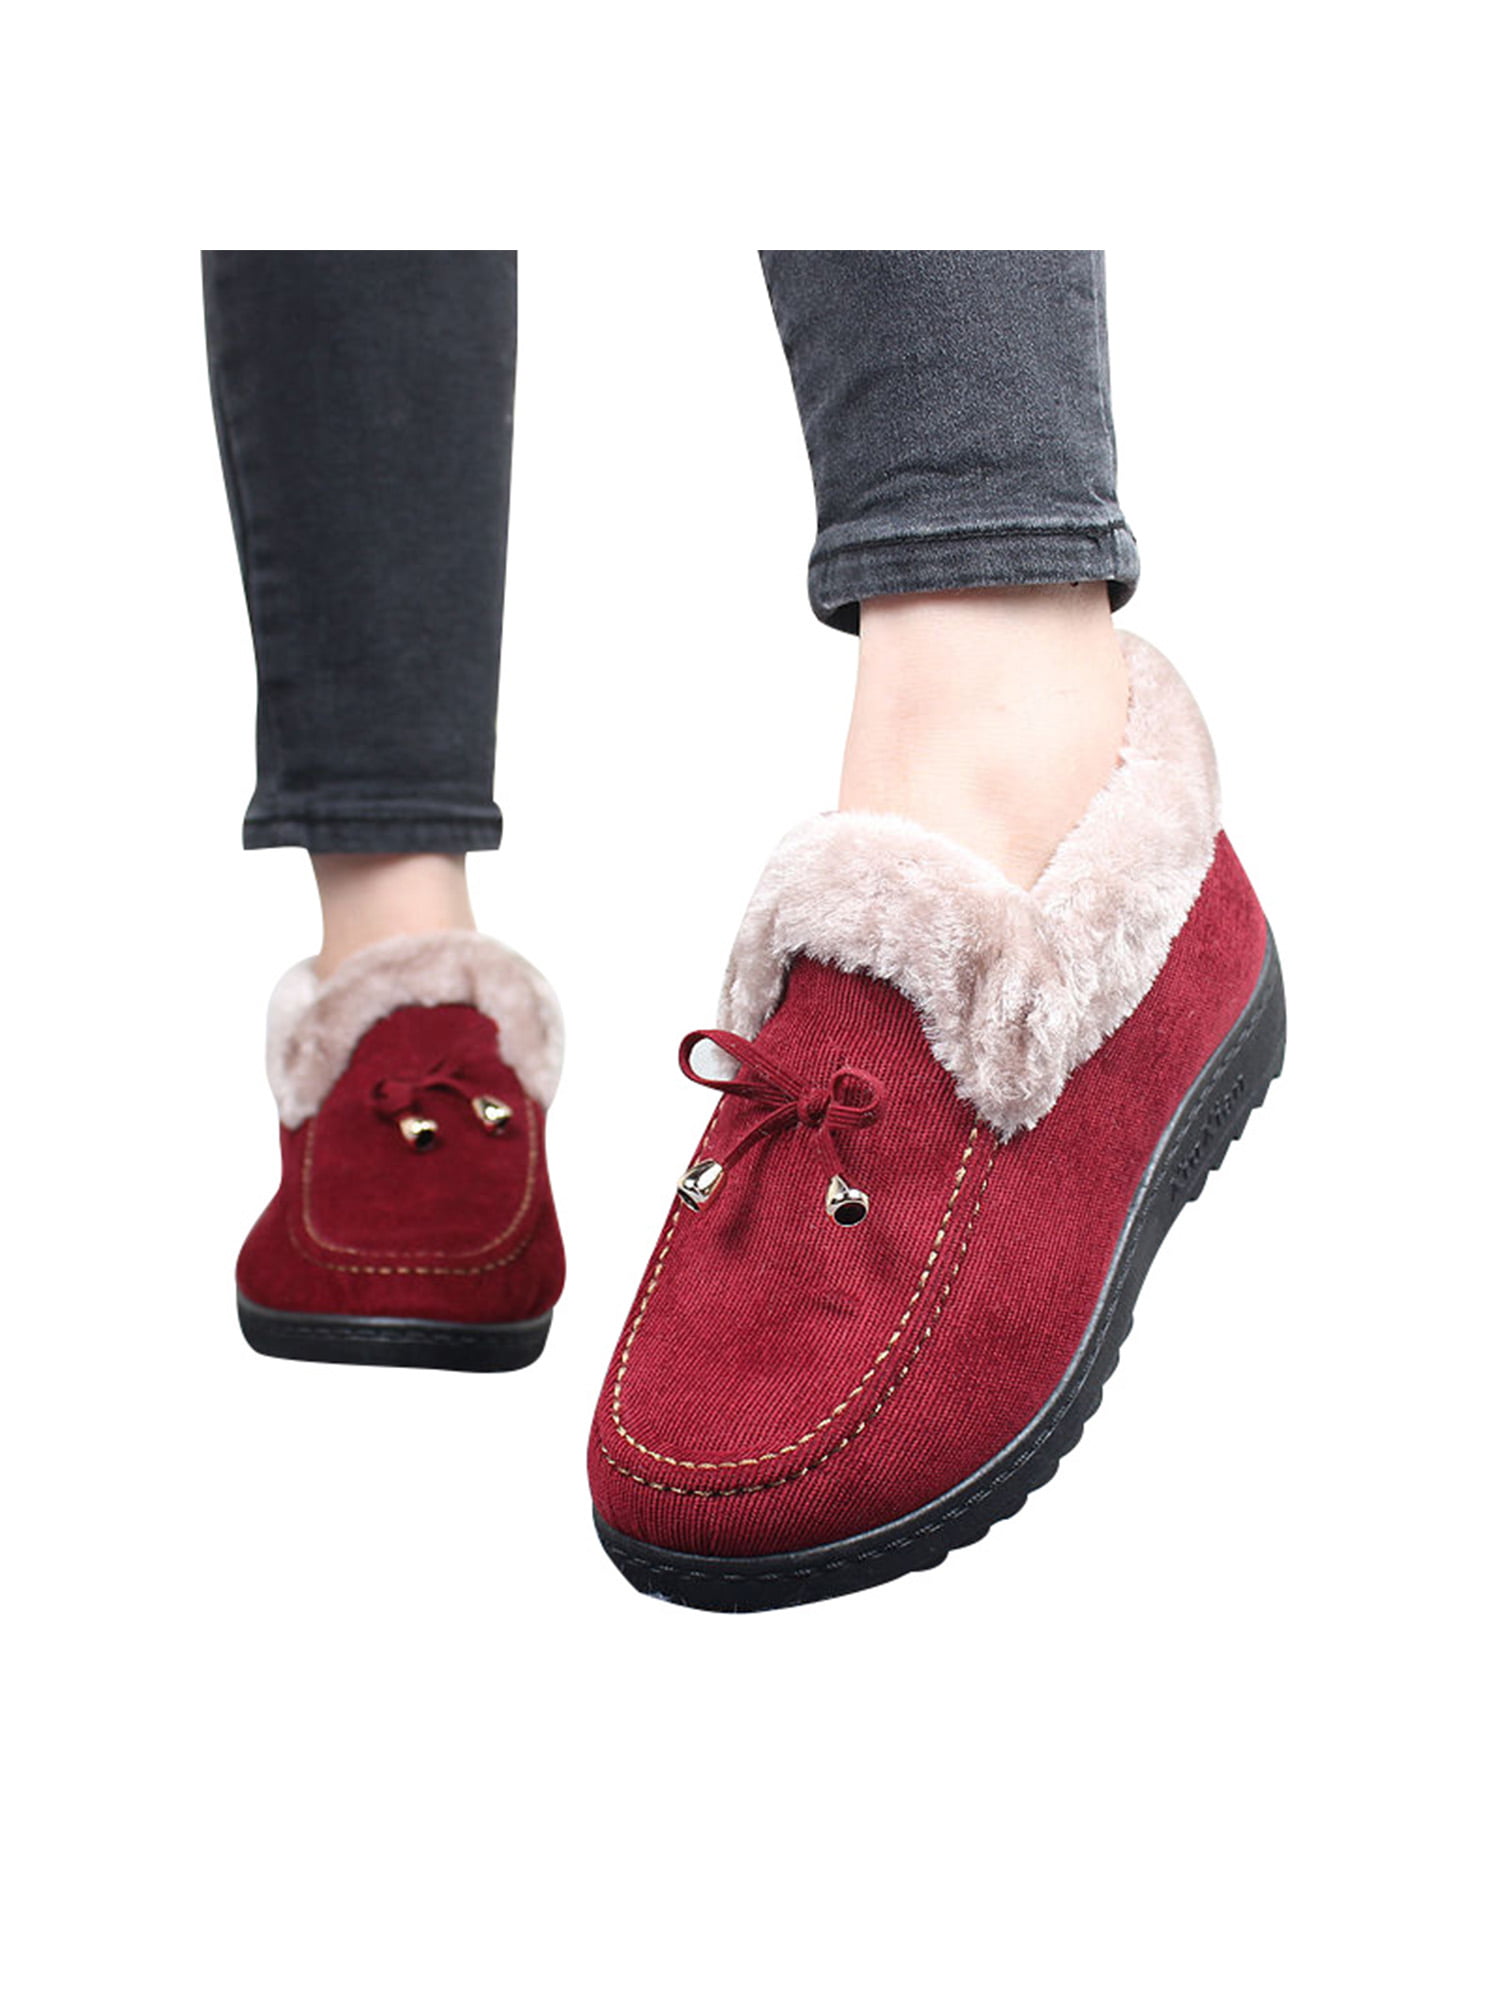 LADIES SLIPPERS WOMEN DUNLOP MEMORY FOAM FUR THERMAL ANKLE BOOTS WARM SHOES SIZE 